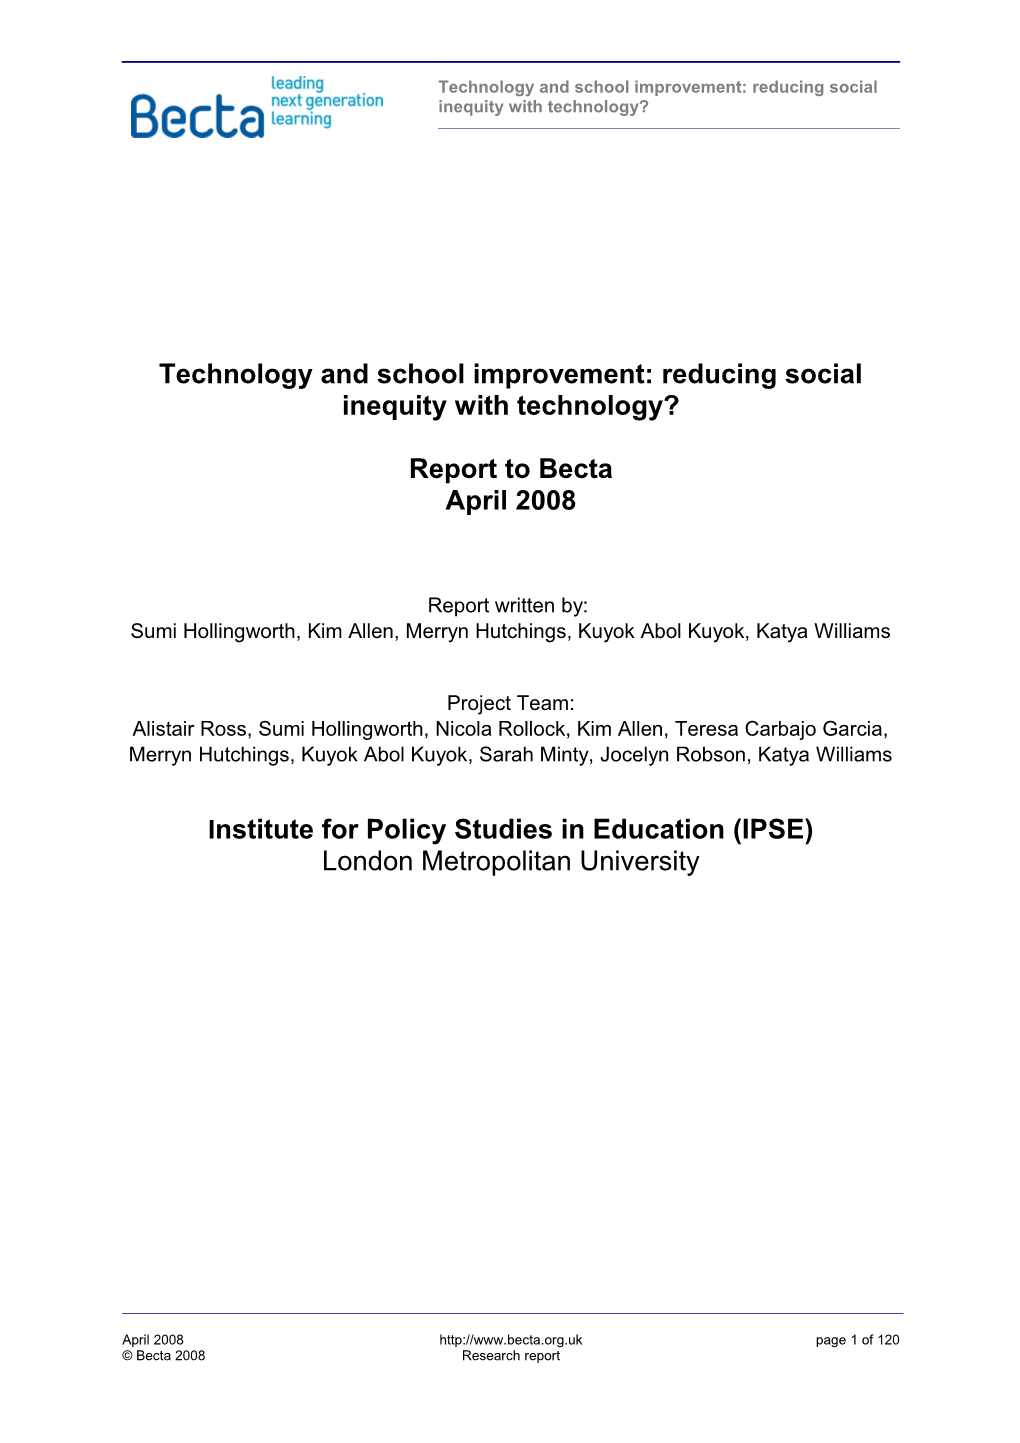 Technology and School Improvement: Reducing Social Inequity with Technology?